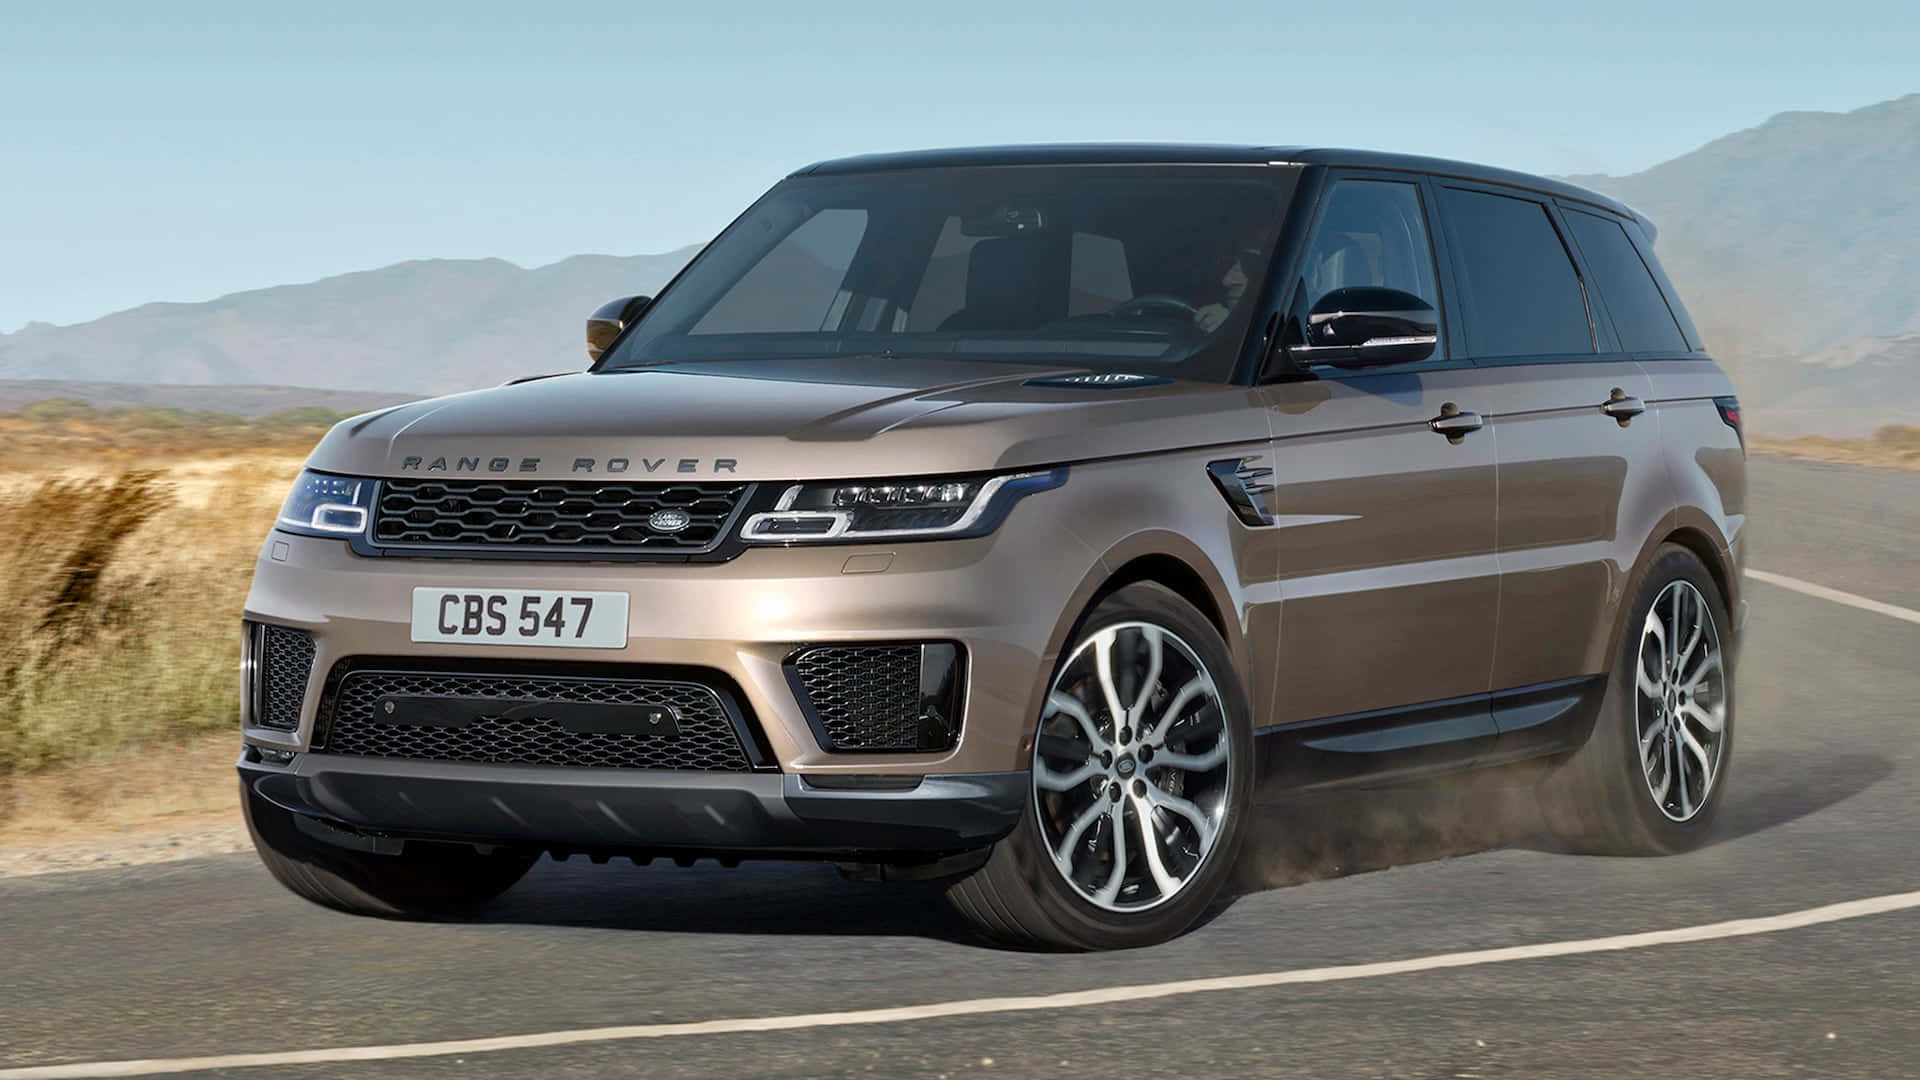 Drive the Luxury of a Range Rover